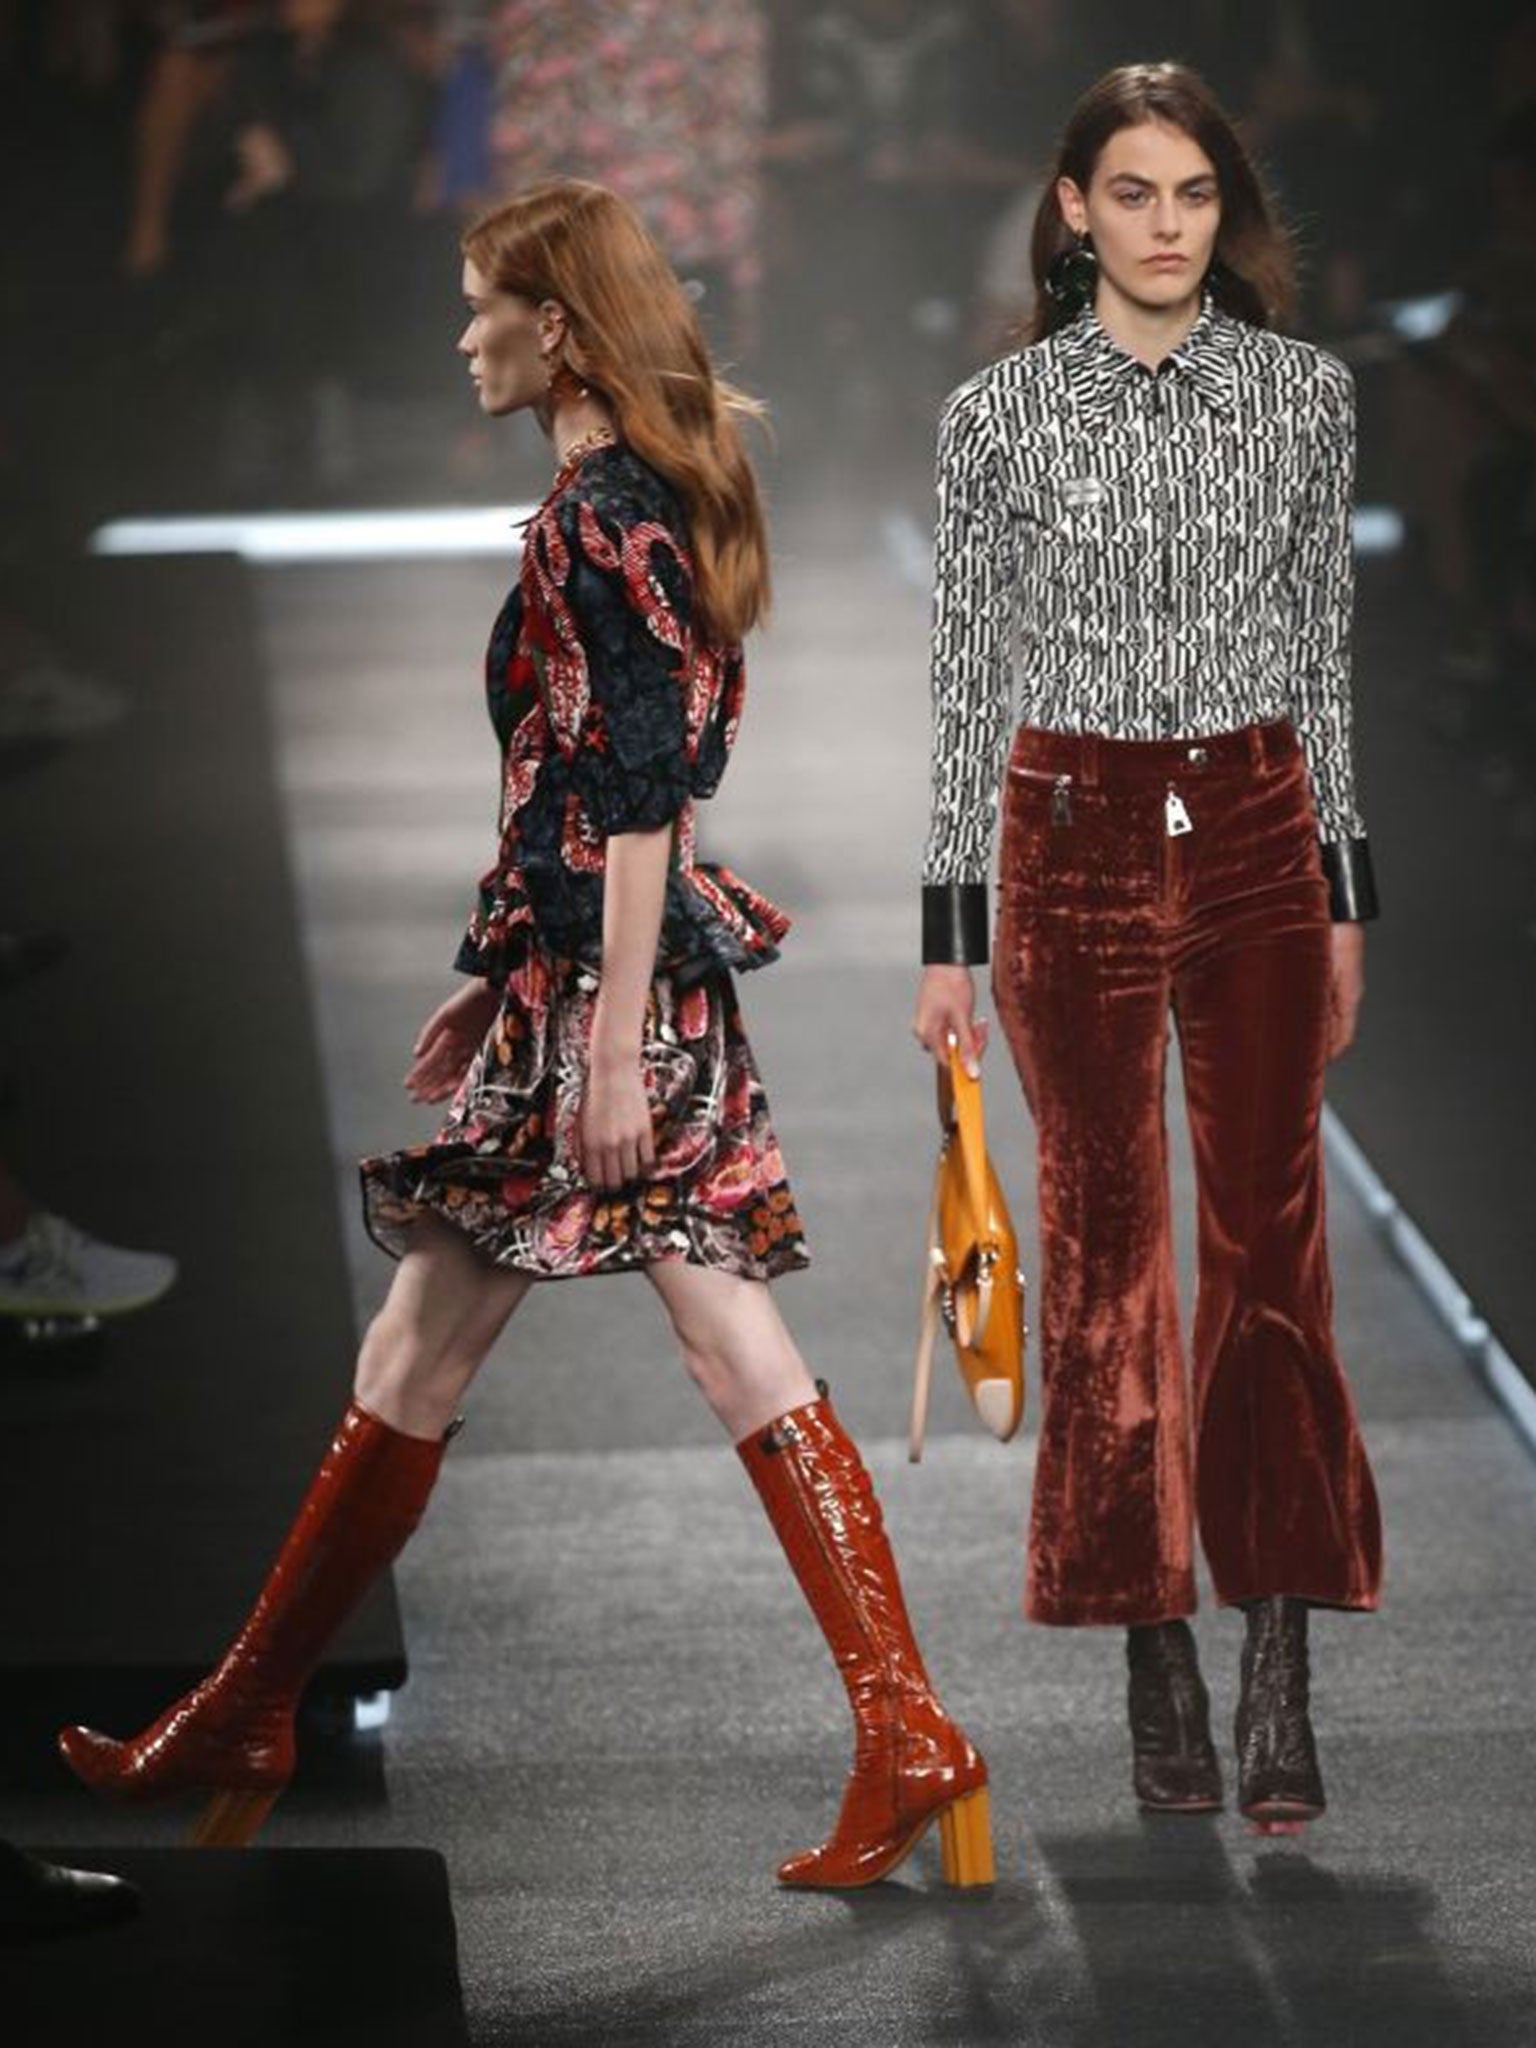 Models present Louis Vuitton's Spring/Summer 2015 ready-to-wear fashion collection during Paris Fashion Week